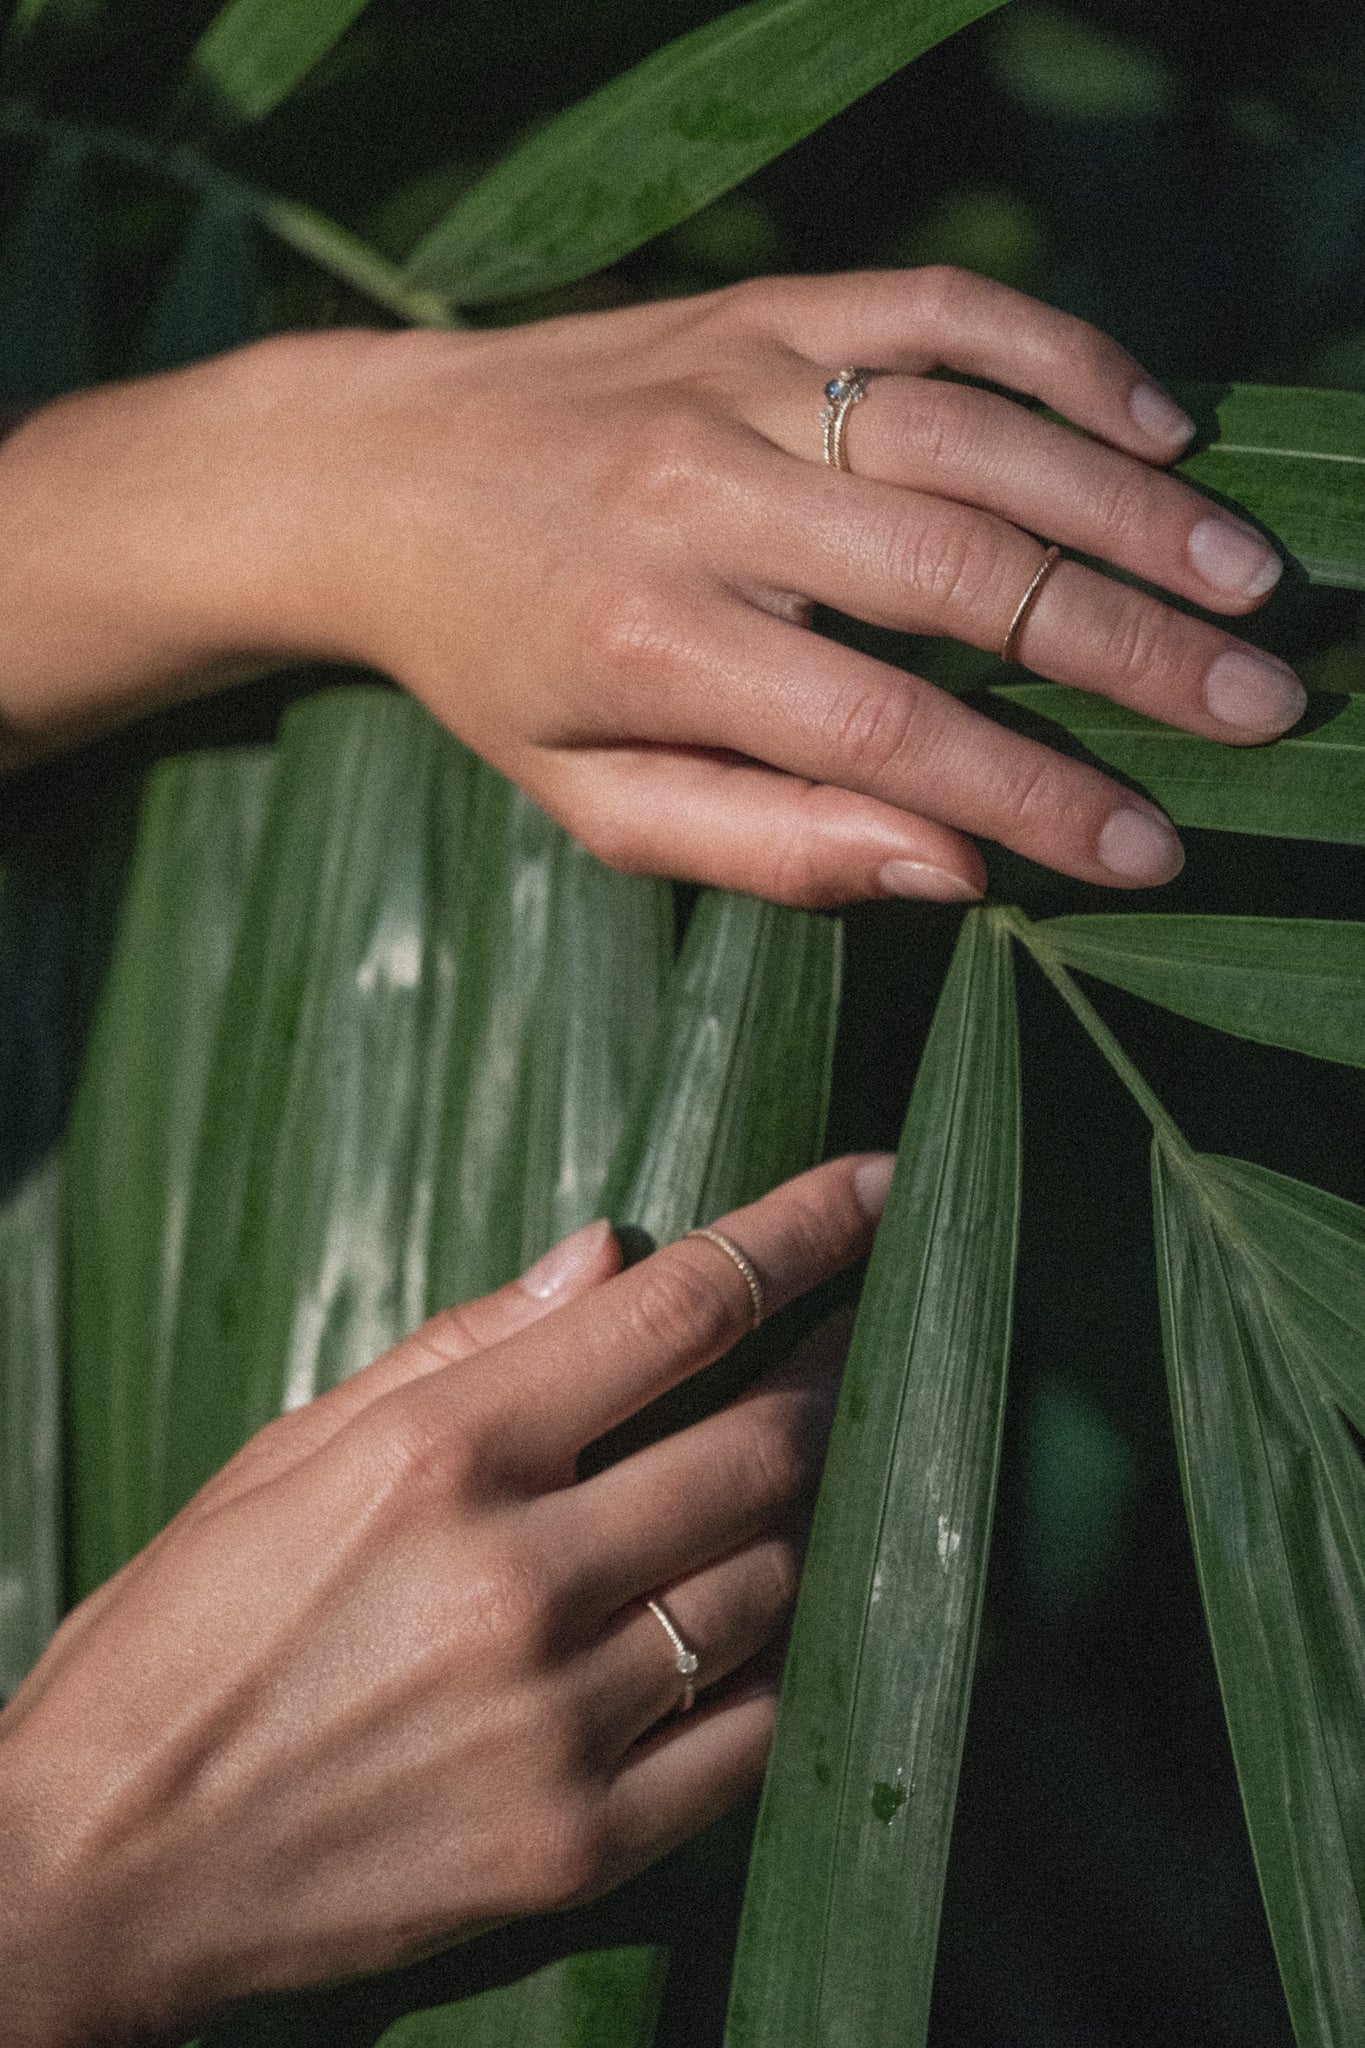 Hands wearing Aiden Jae's yellow gold, diamond, and gemstone rings and touching a green palm frond.